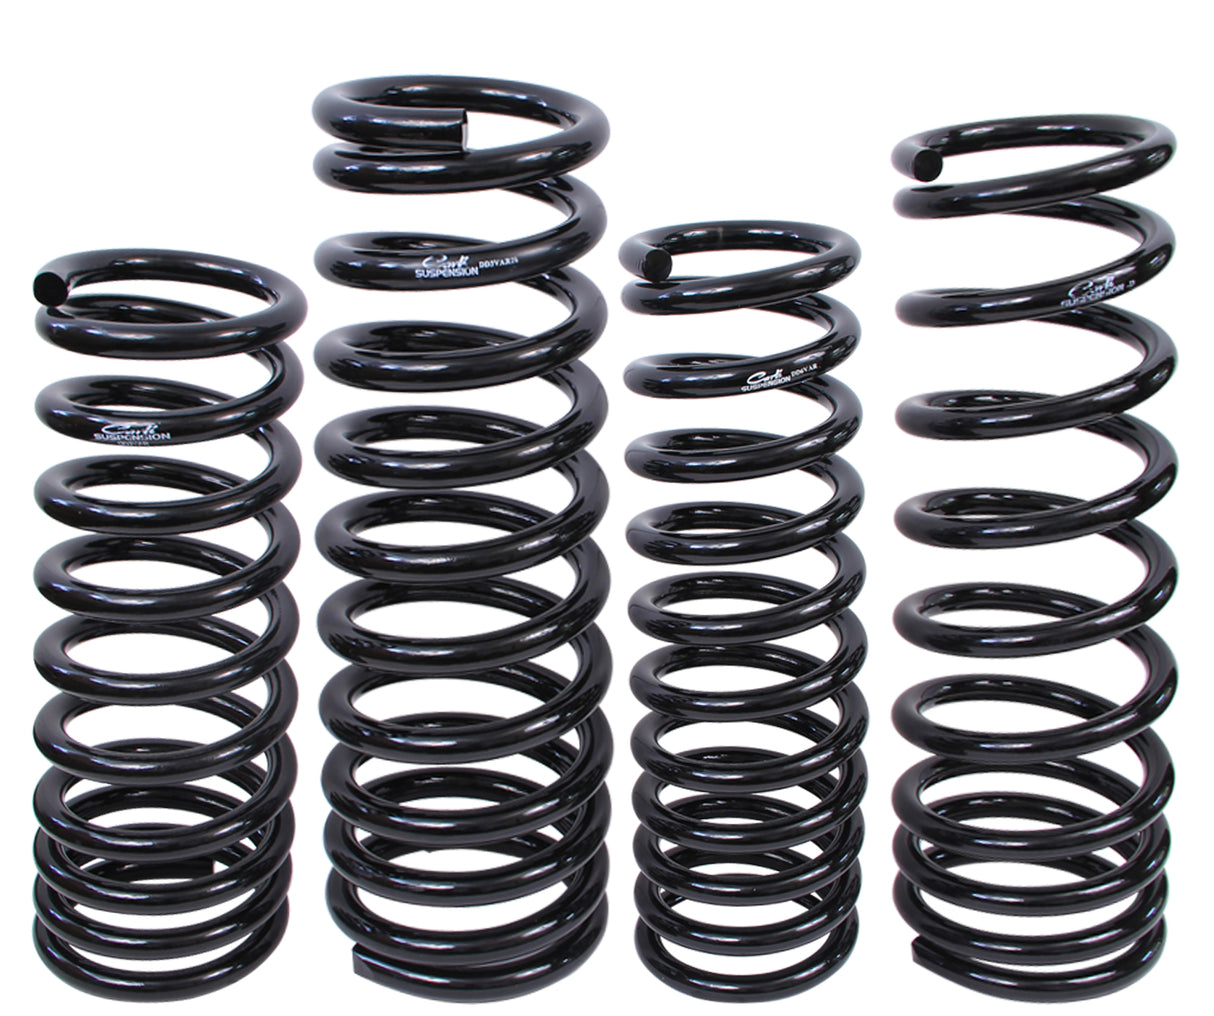 03-12 RAM 2500/3500 FRONT COIL SPRINGS 3" LIFT